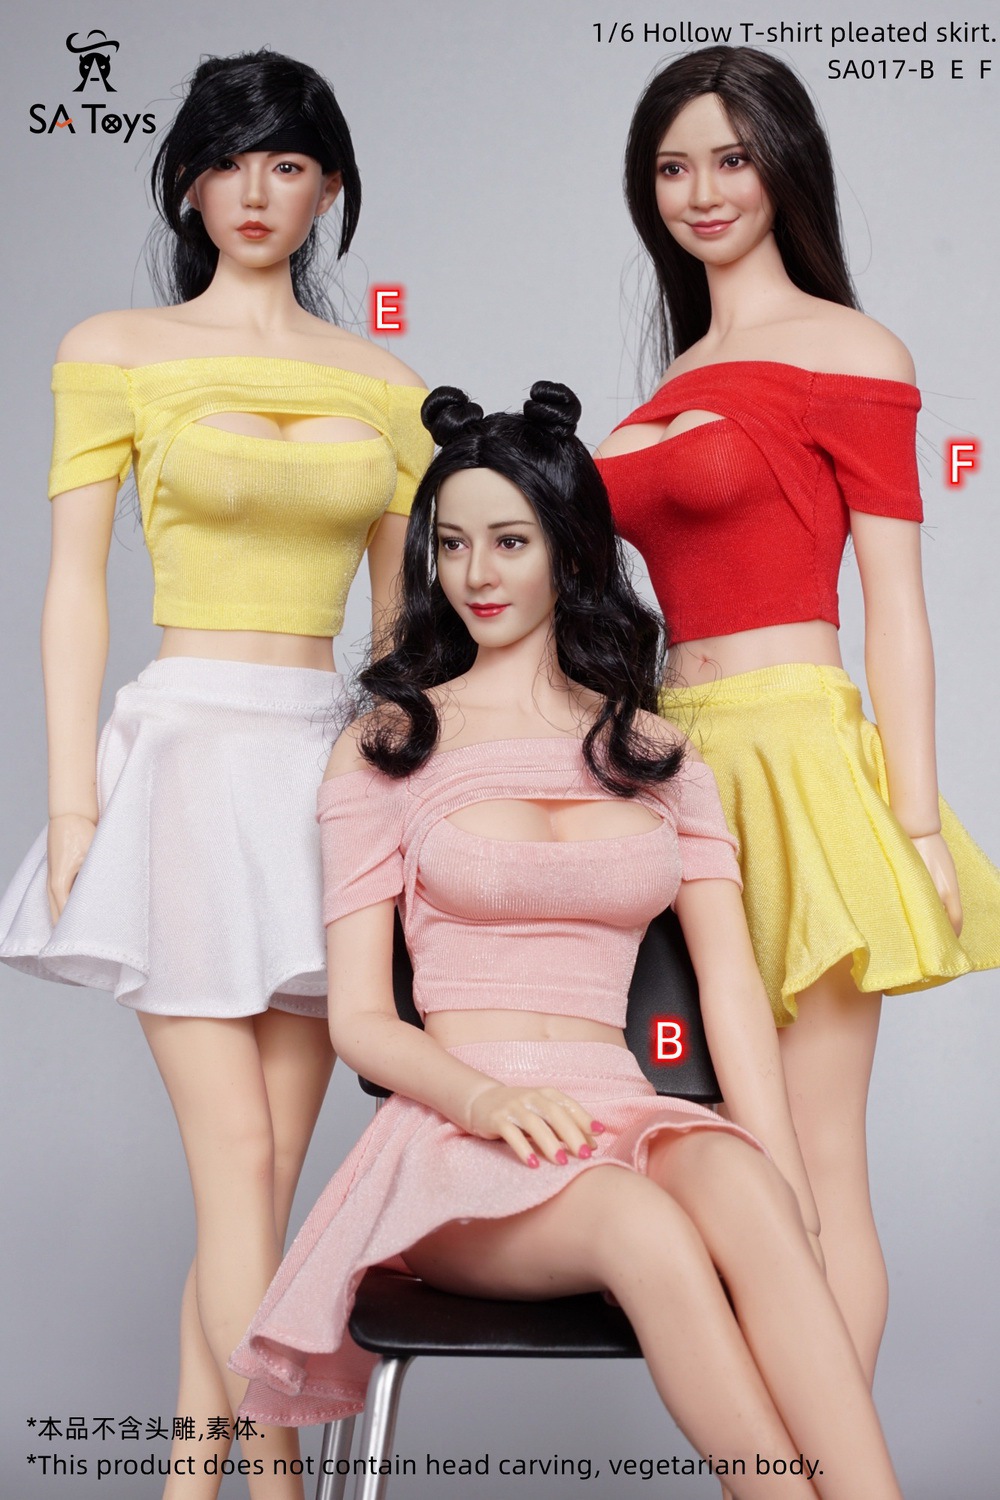 posterstyledress - NEW PRODUCT: SA Toys: 1/6 Personalized Poster Style Tight Dress/ Hollow T-shirt Pleated Skirt/Side Zipper Tight Skirt [Various styles available]  16560010